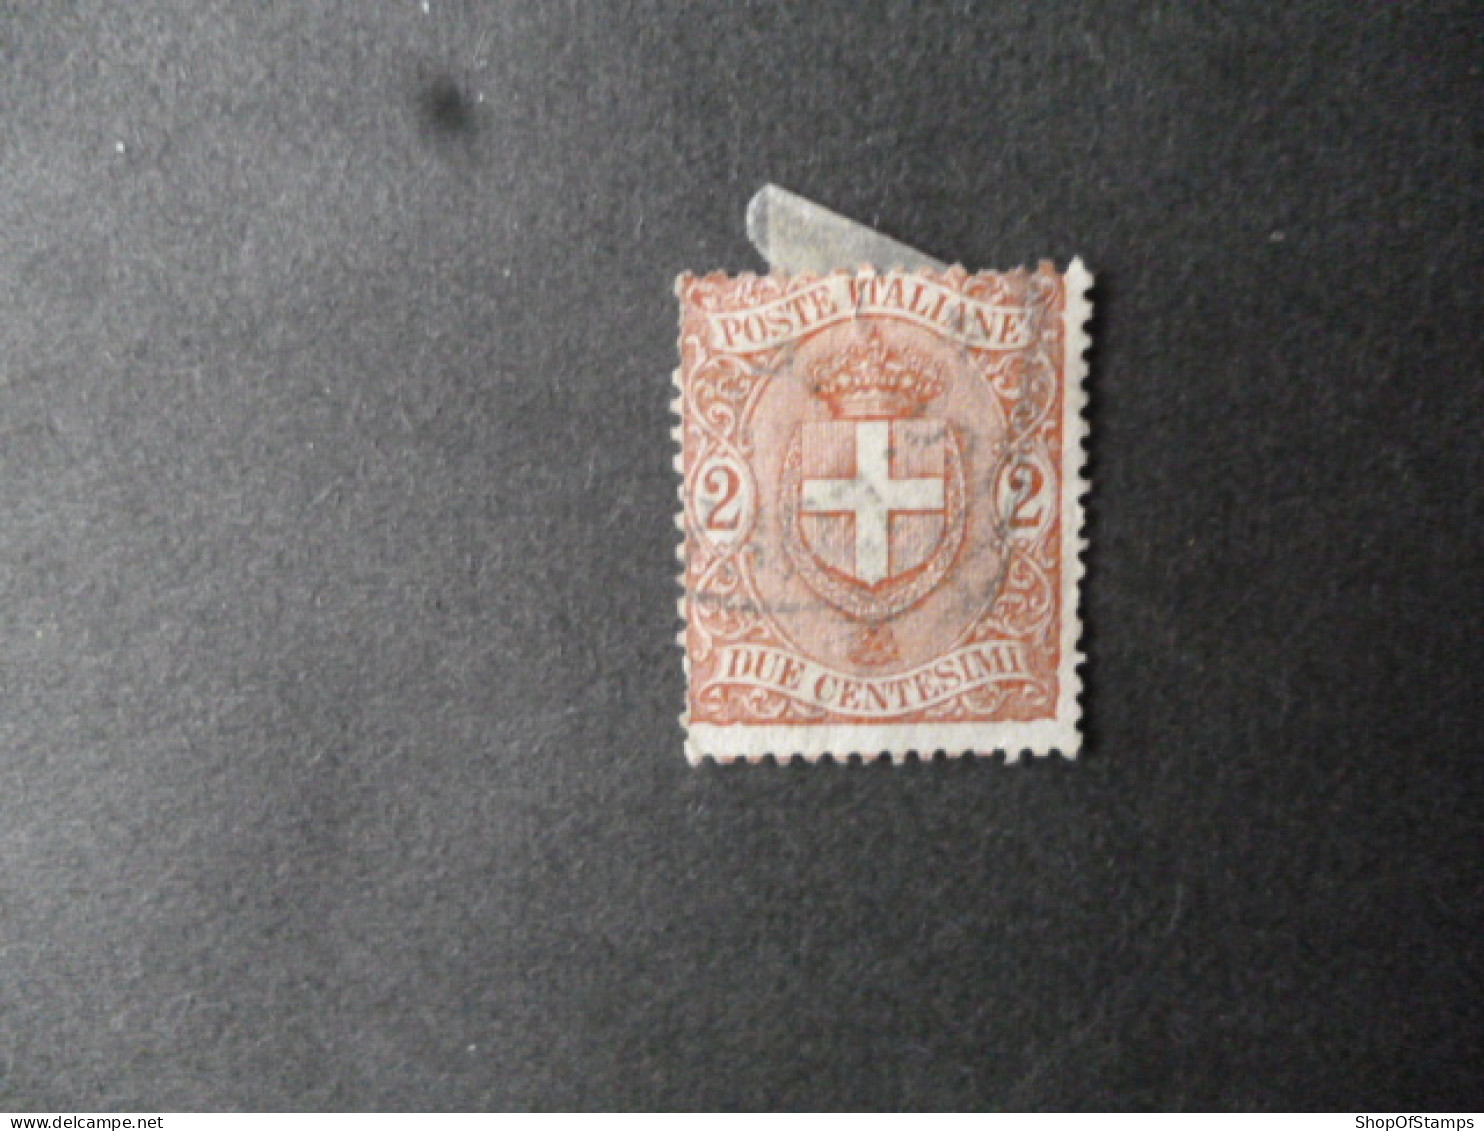 ITALY SG 54 FINE USED - Unclassified